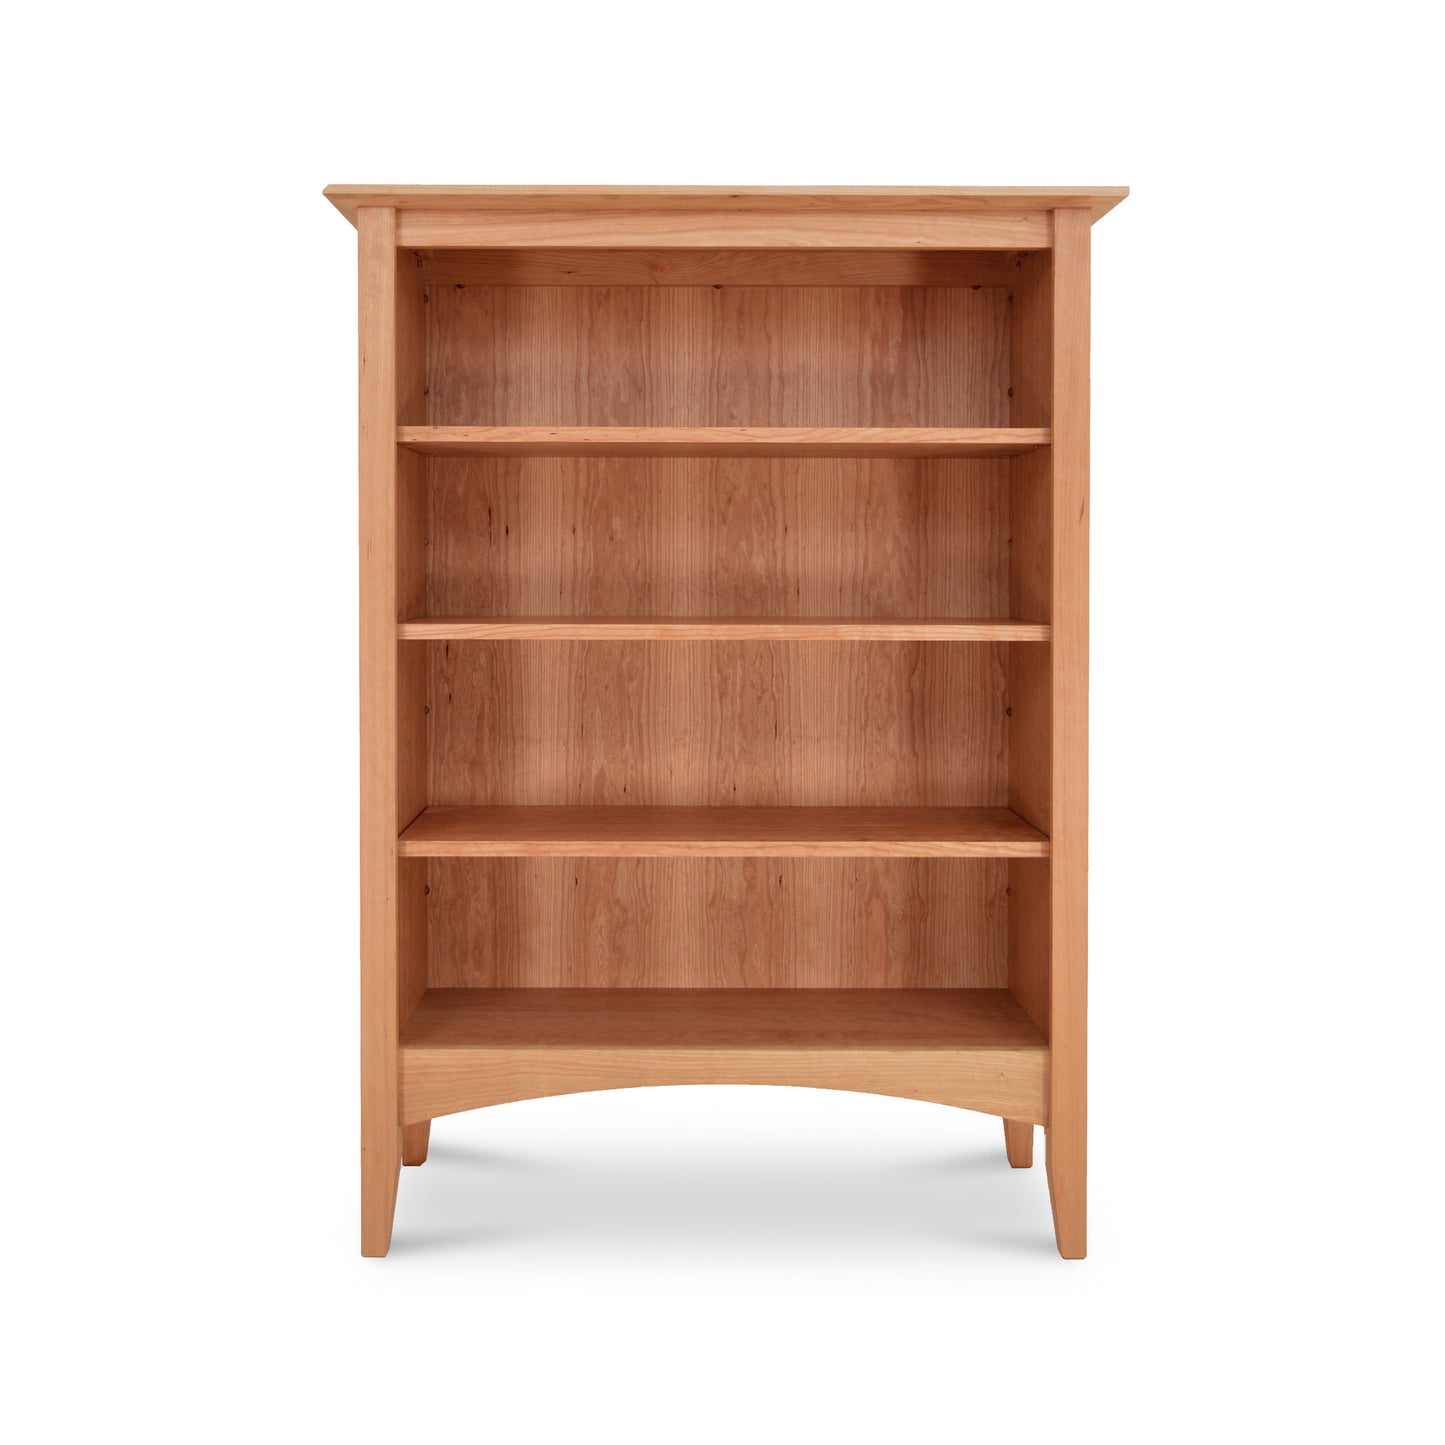 A Maple Corner Woodworks American Shaker Bookcase, crafted from sustainably harvested hardwoods, featuring four shelves, empty and isolated on a white background.